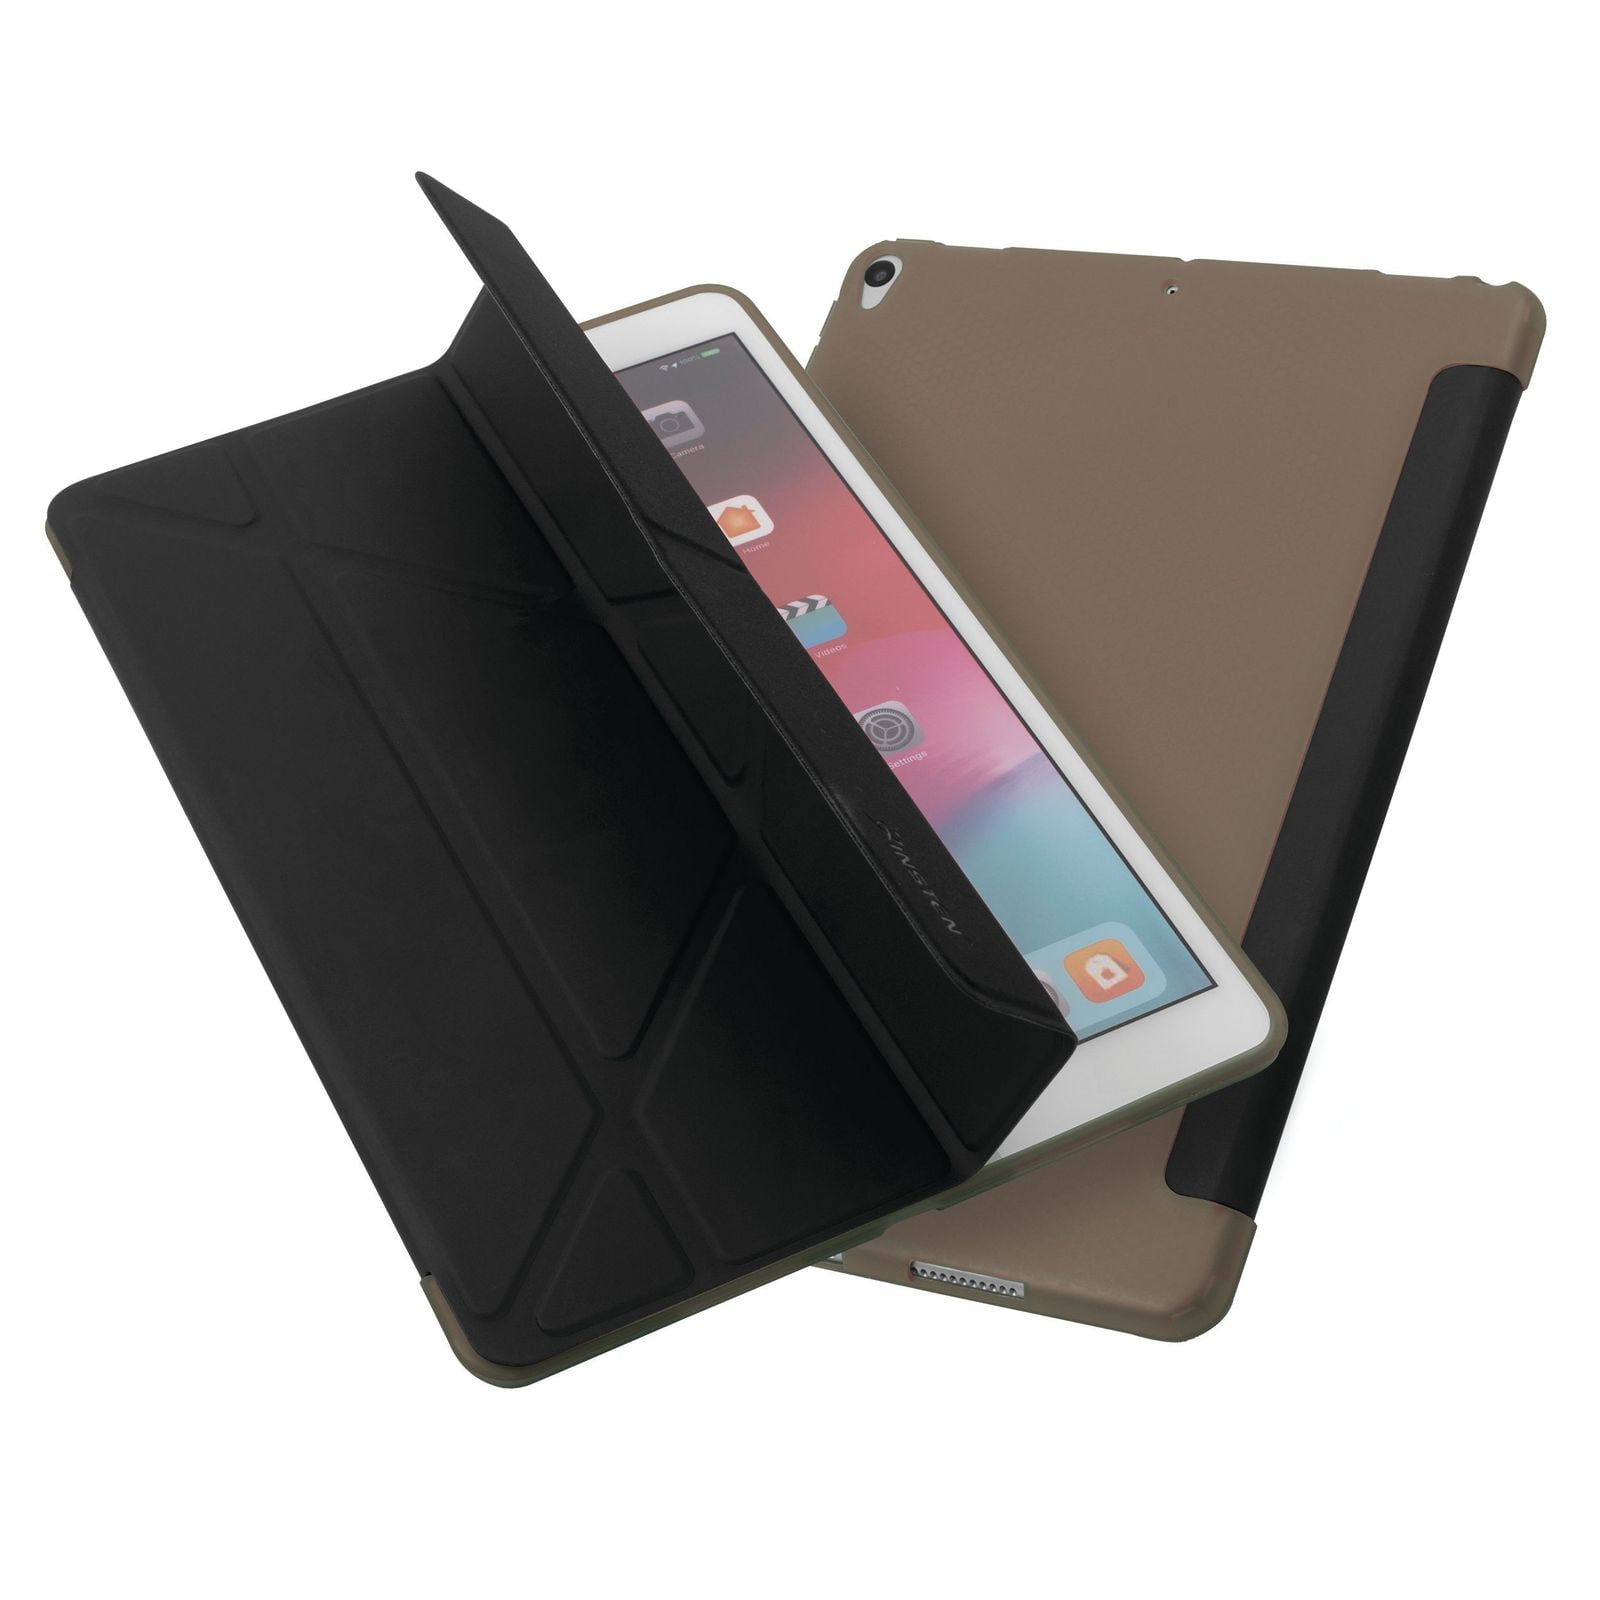 Insten - Tablet Case for iPad 3, 10.5 inch, Multifold Stand, Magnetic Cover Pencil Charging, Black - Walmart.com